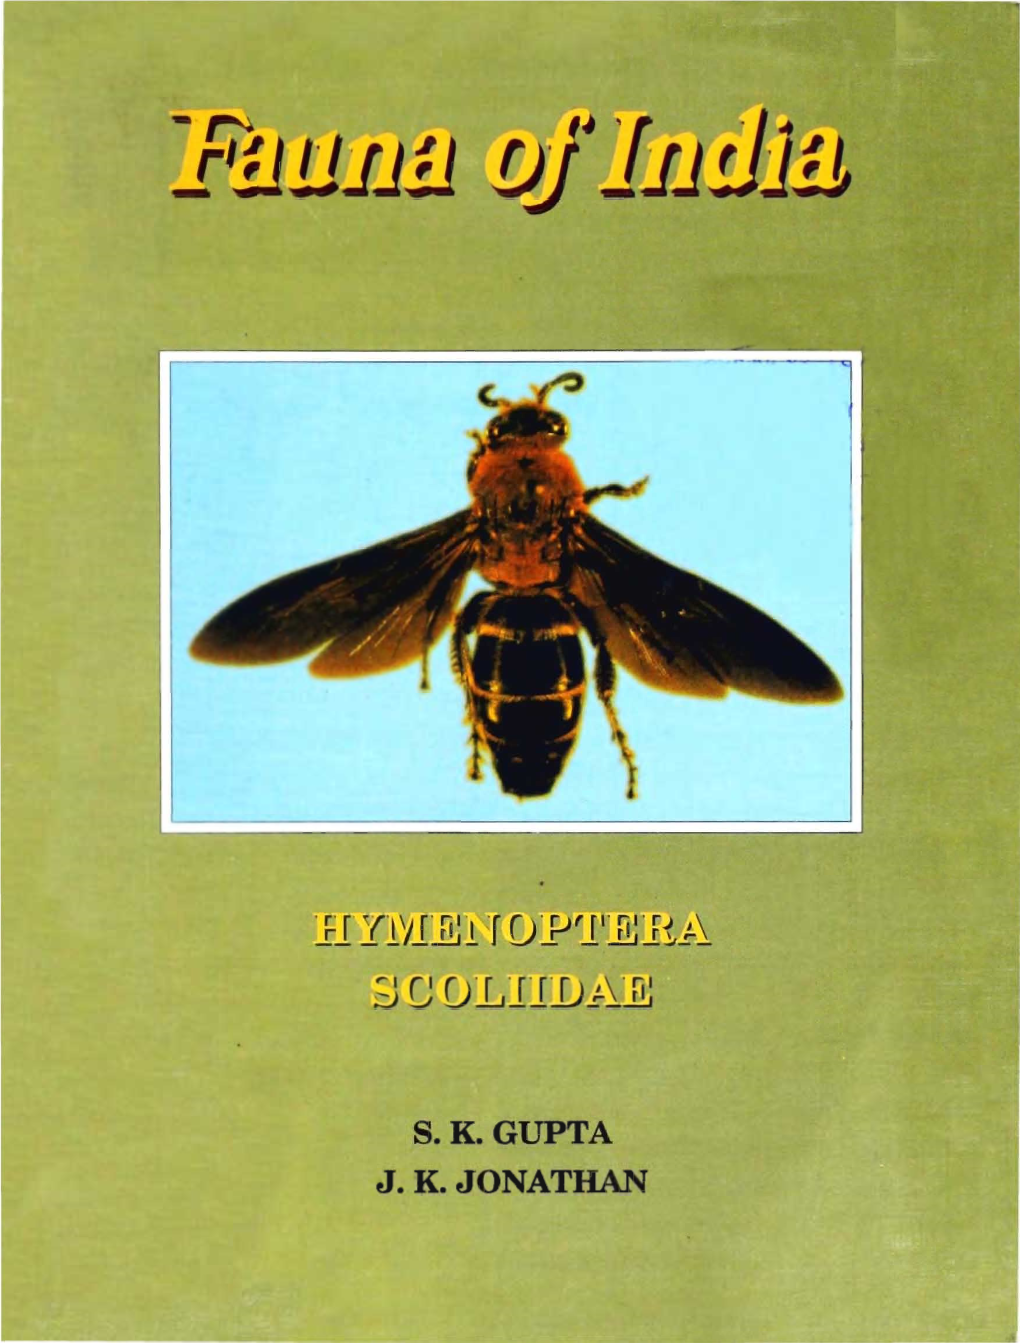 S. K. GUPTA J.K. 0 a HAN This Volume Deals with the Family Scoliidae Which Belongs to Aculeate Group of Hymenoptera